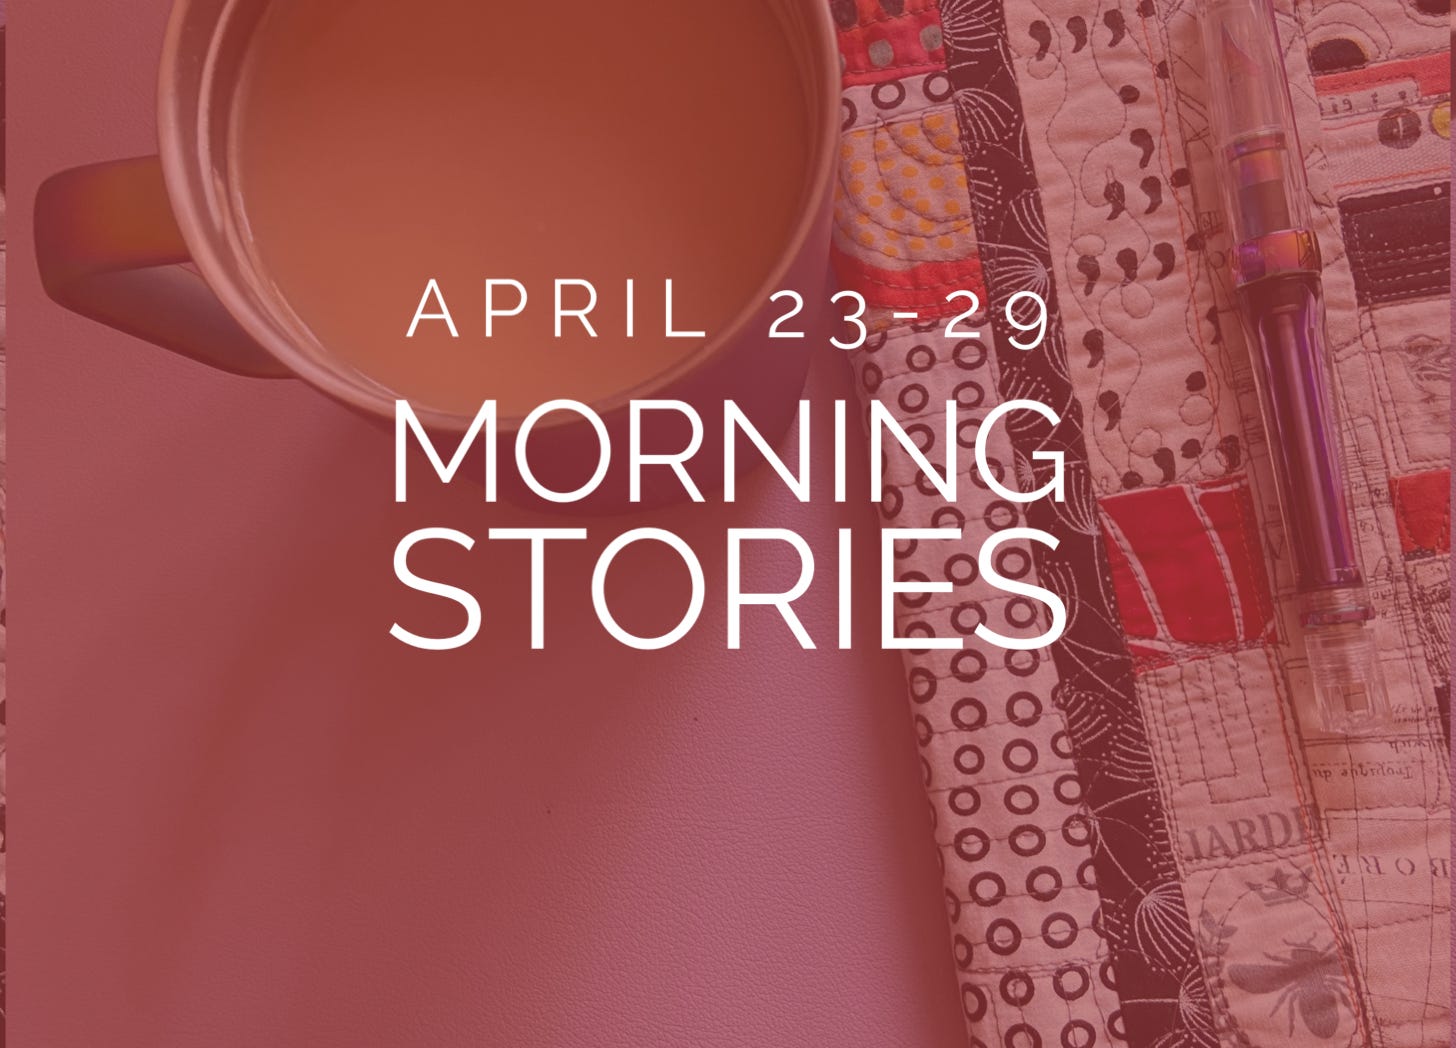 Morning Stories header - April 23-29 - coffee and journal